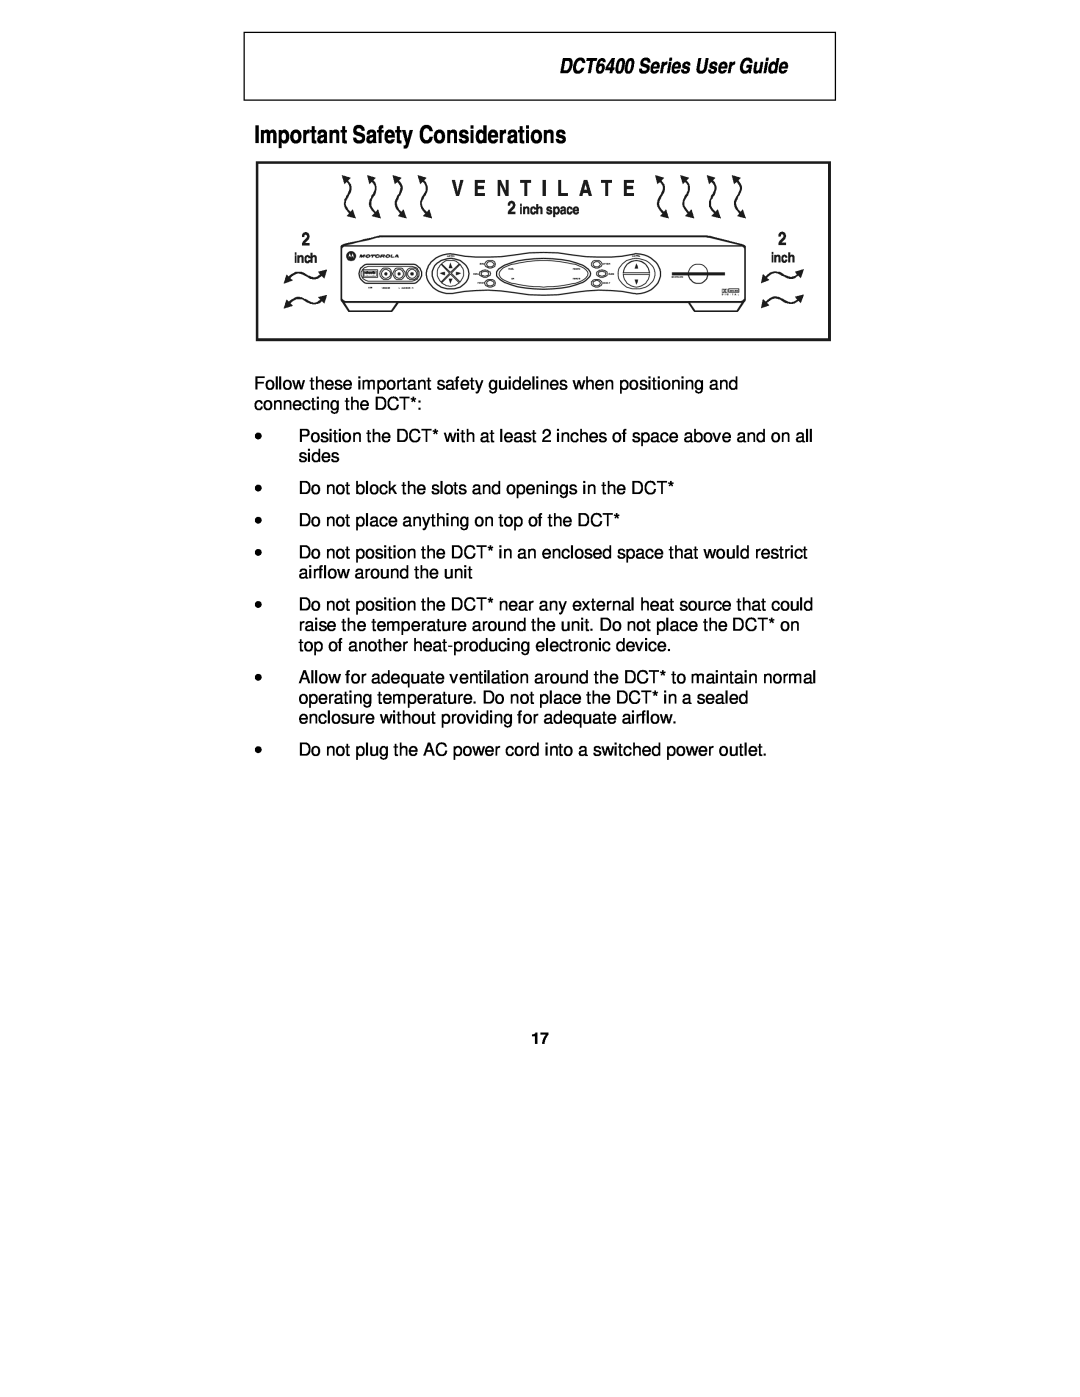 Motorola manual Important Safety Considerations, V E N T I L A T E, DCT6400 Series User Guide 